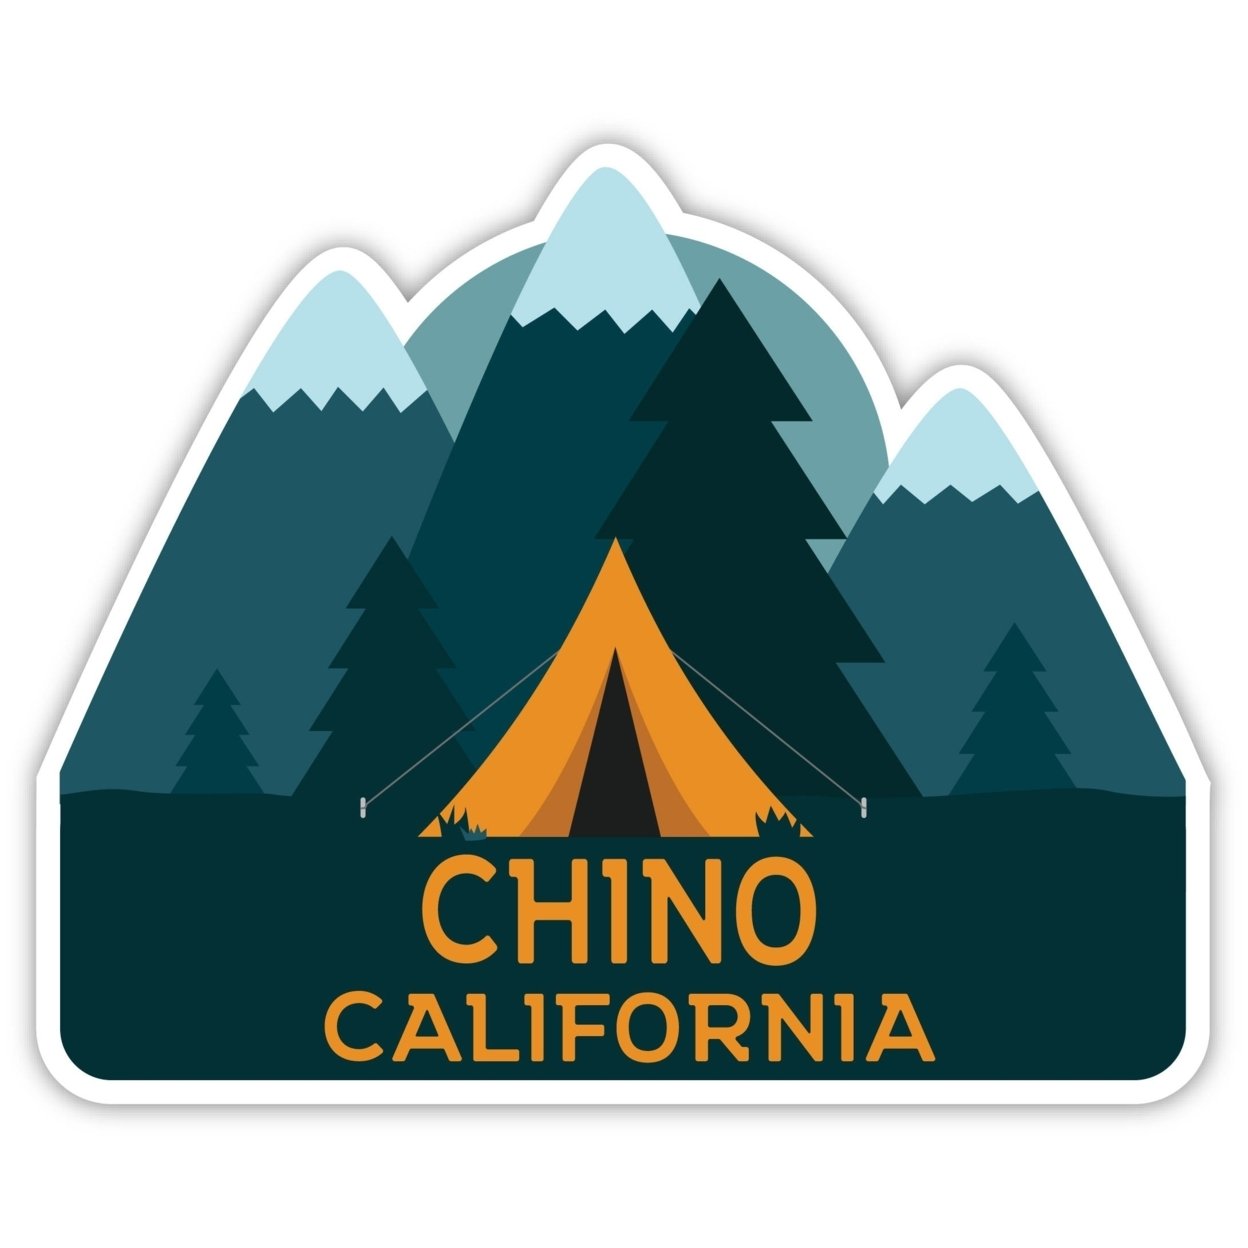 Chino California Souvenir Decorative Stickers (Choose Theme And Size) - 4-Pack, 12-Inch, Tent